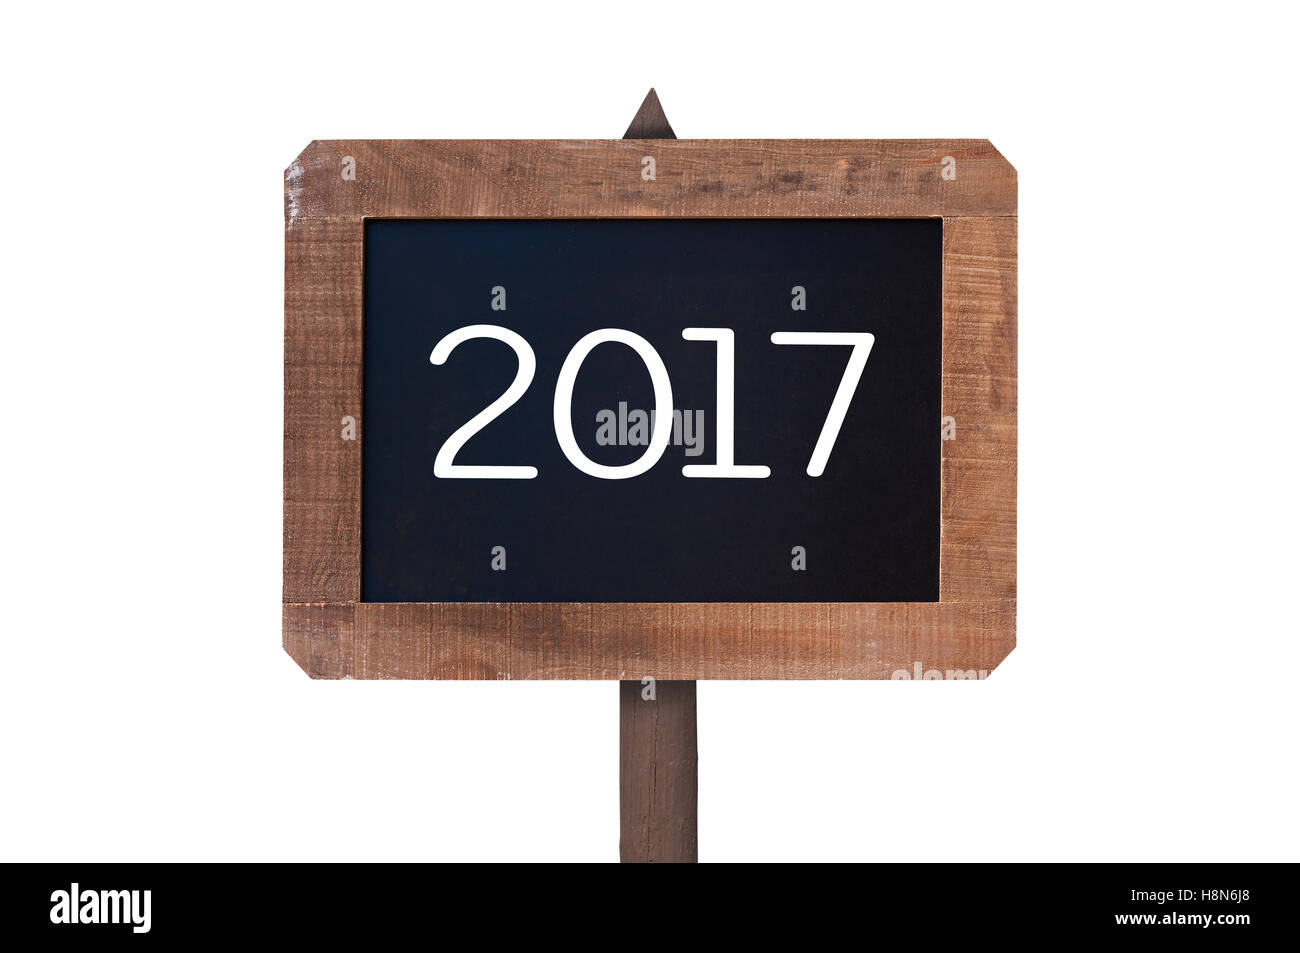 2017 written on a vintage wooden post sign isolated on white background Stock Photo